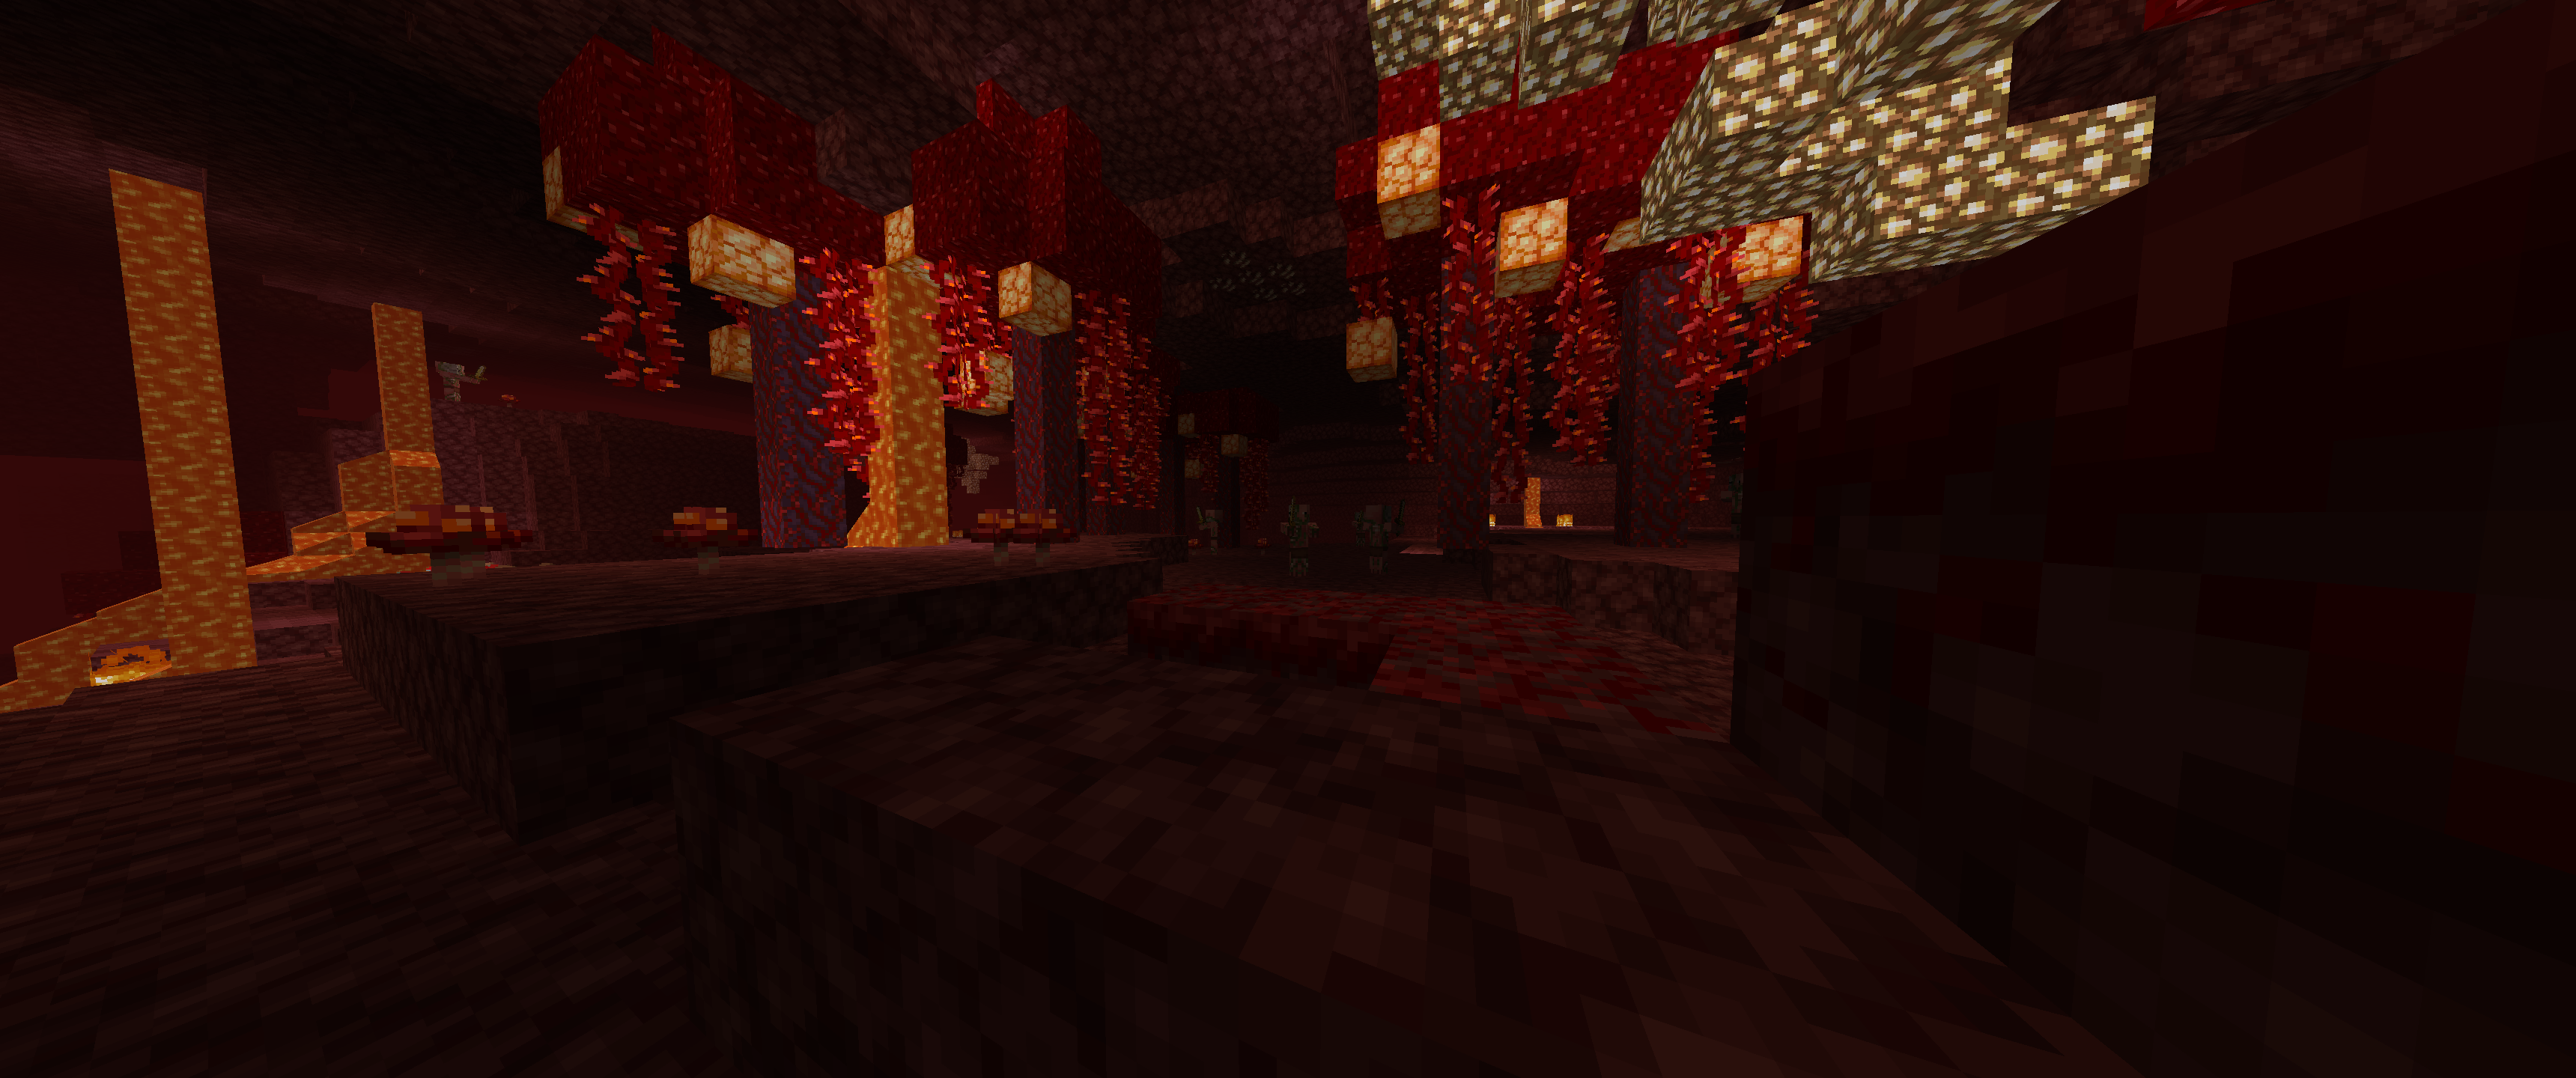 Факел светится в руке мод 1.12 2. Nether Dungeons 1.12.2. Nether 1.16. Nether update 1.12.2. 1.14.4 Nether.